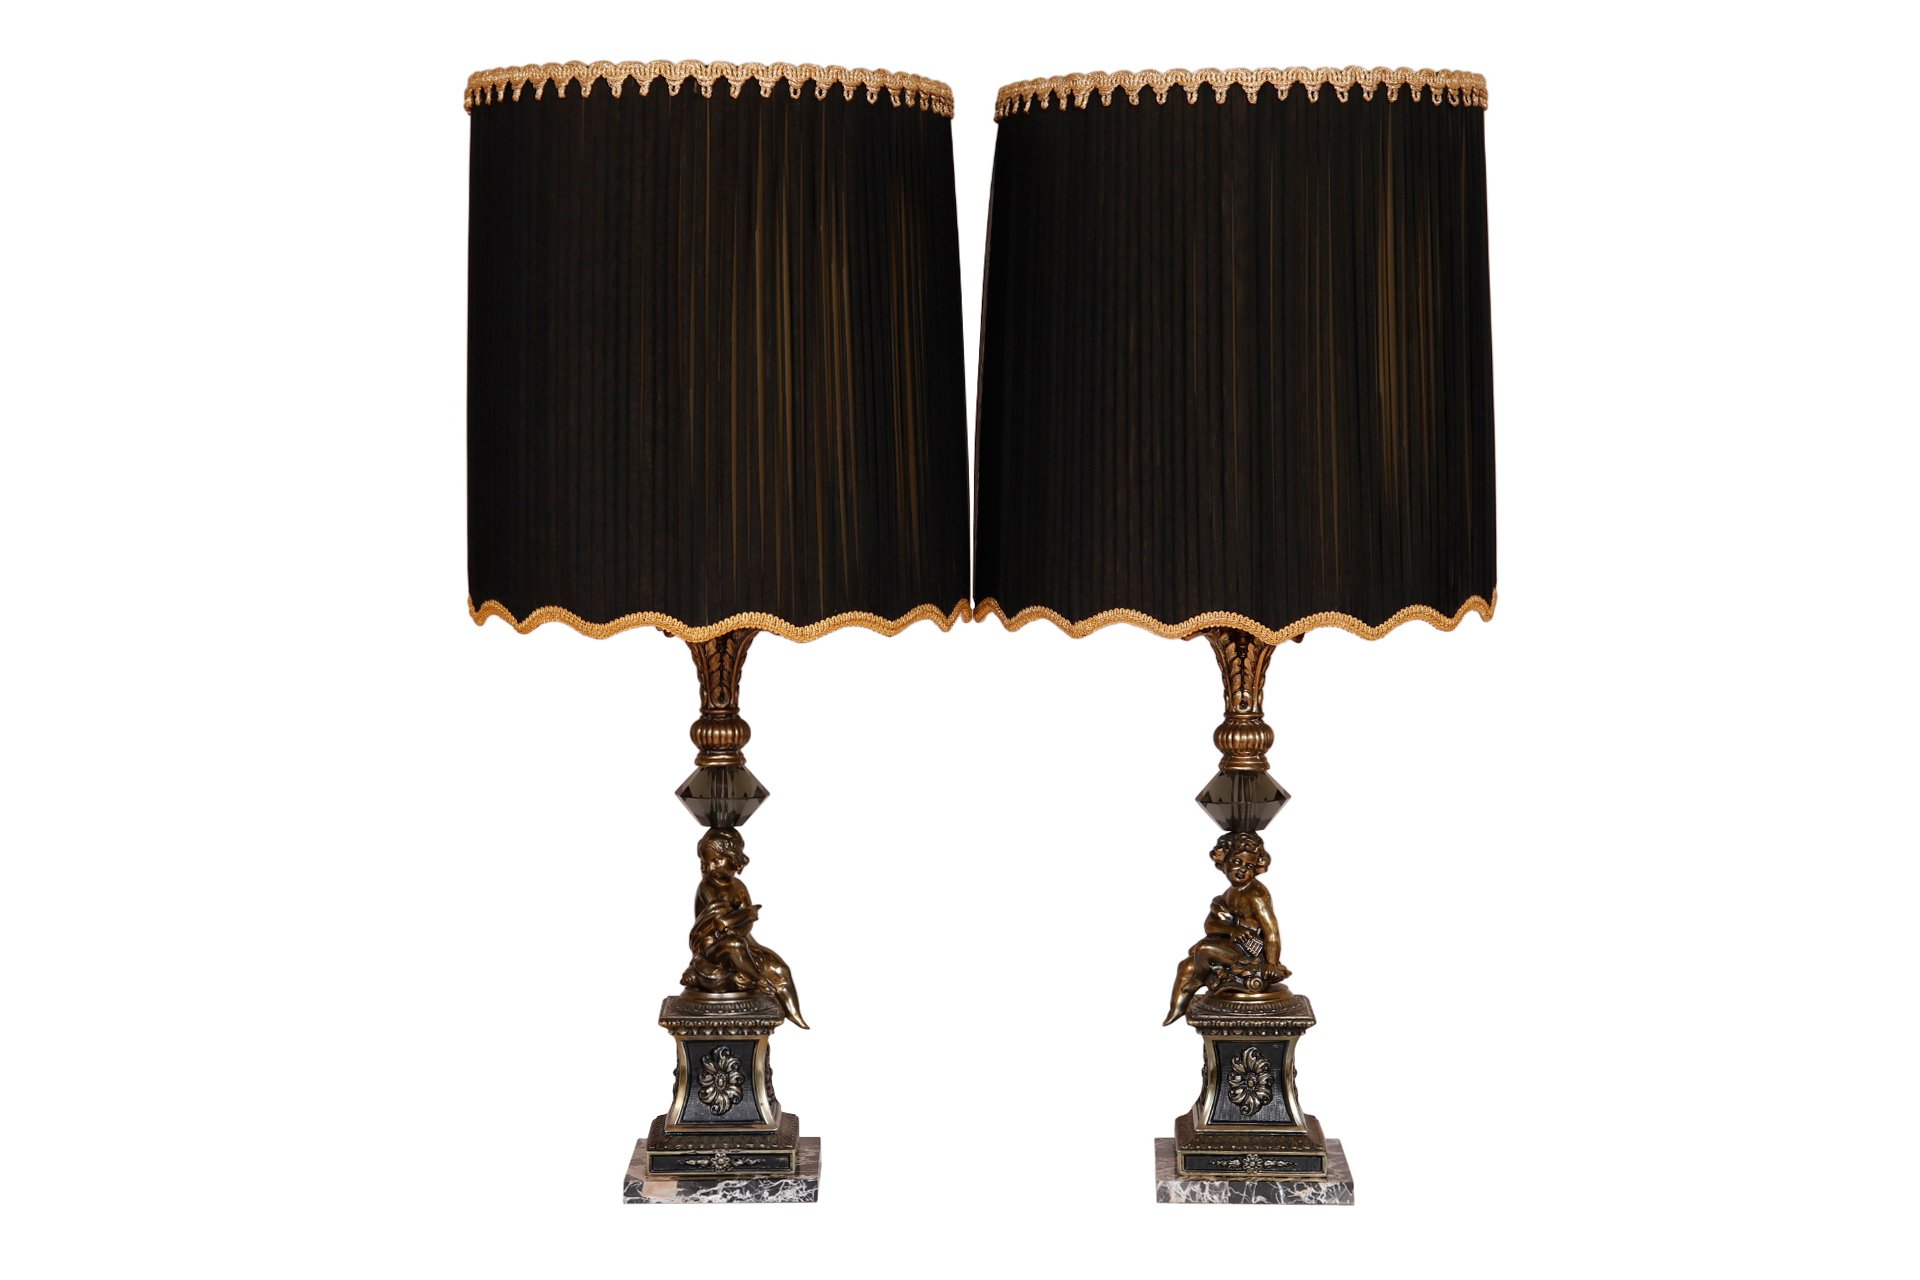 Figural French Empire Table Lamps, Pair~P77620672